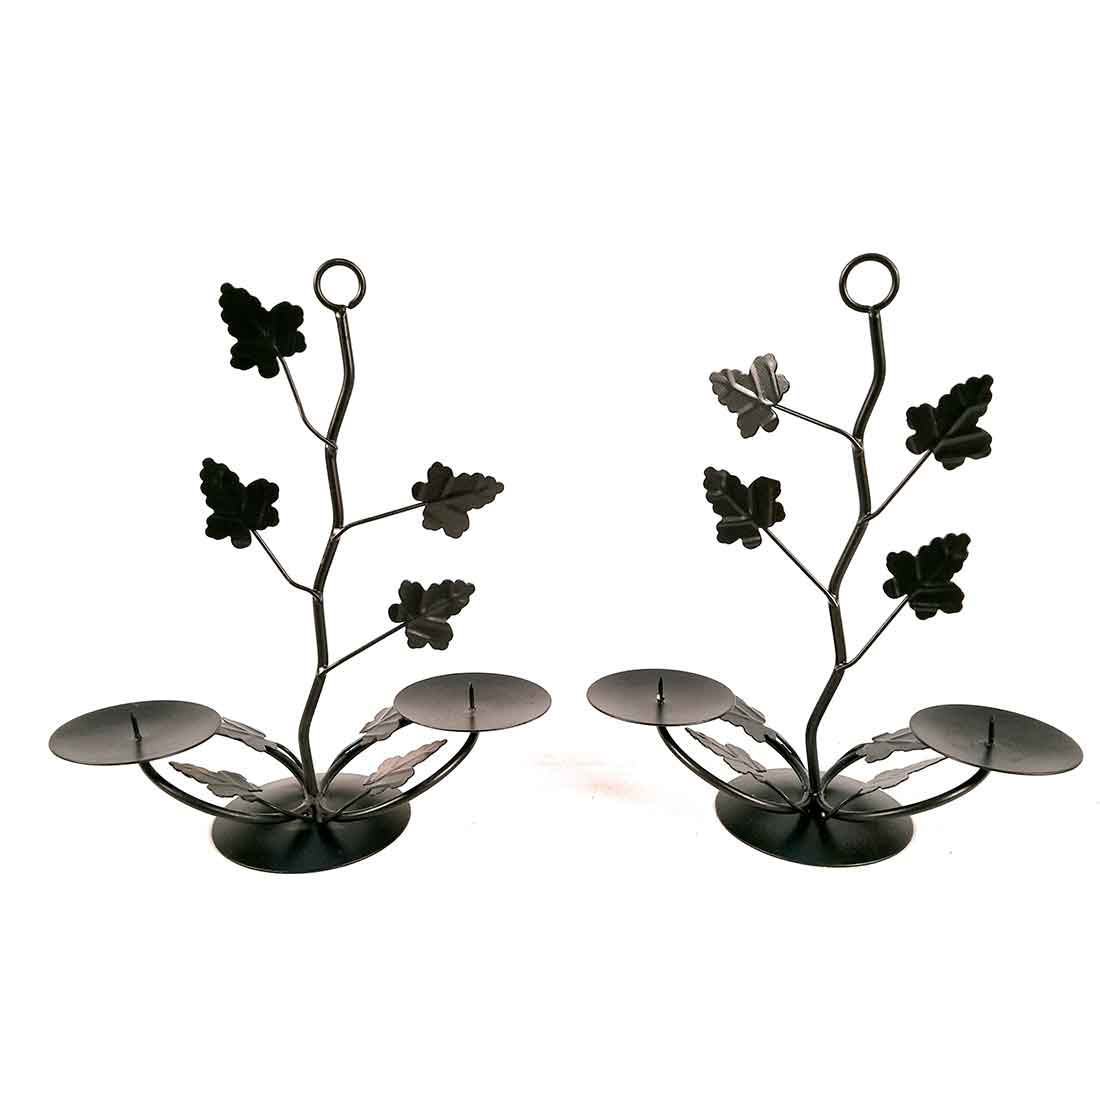 TeaLight Holder Antique | Candle Holders Stand With Two Slots | Tea Light Candle Stands - Tree Branch Design - For Home, Table, Living Room, Dining room, Bedroom Decor | For Festival Decoration & Gifts  - Set of 2